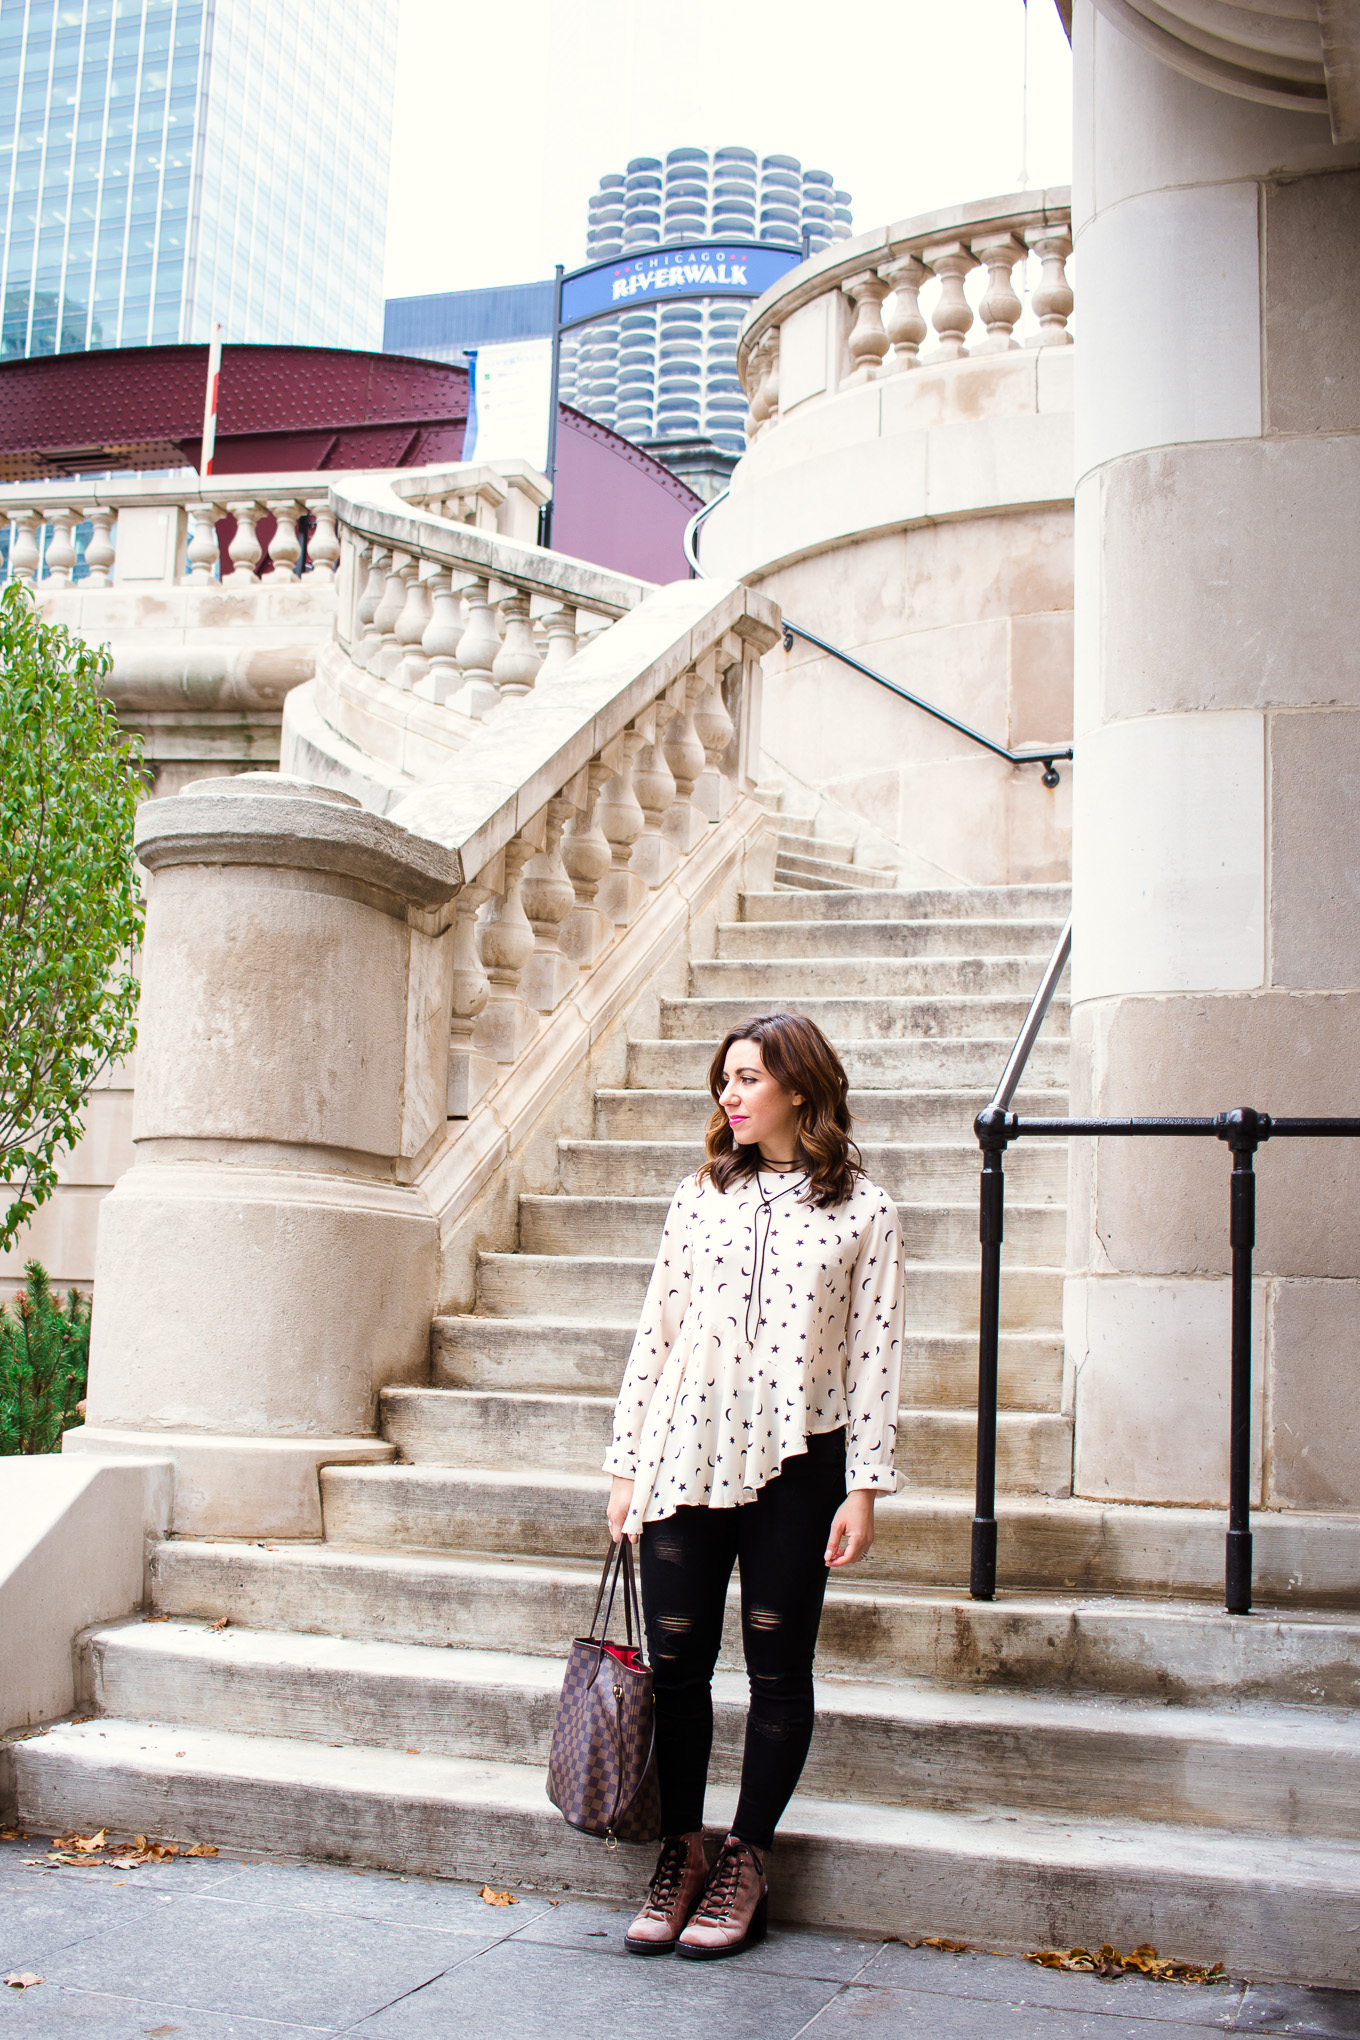 Lifestyle blogger Roxanne of Glass of Glam wearing a star print asymmetrical top, Old Navy denim, and pink combat boots - Asymmetric top with star print by popular Chicago fashion blogger Glass of Glam